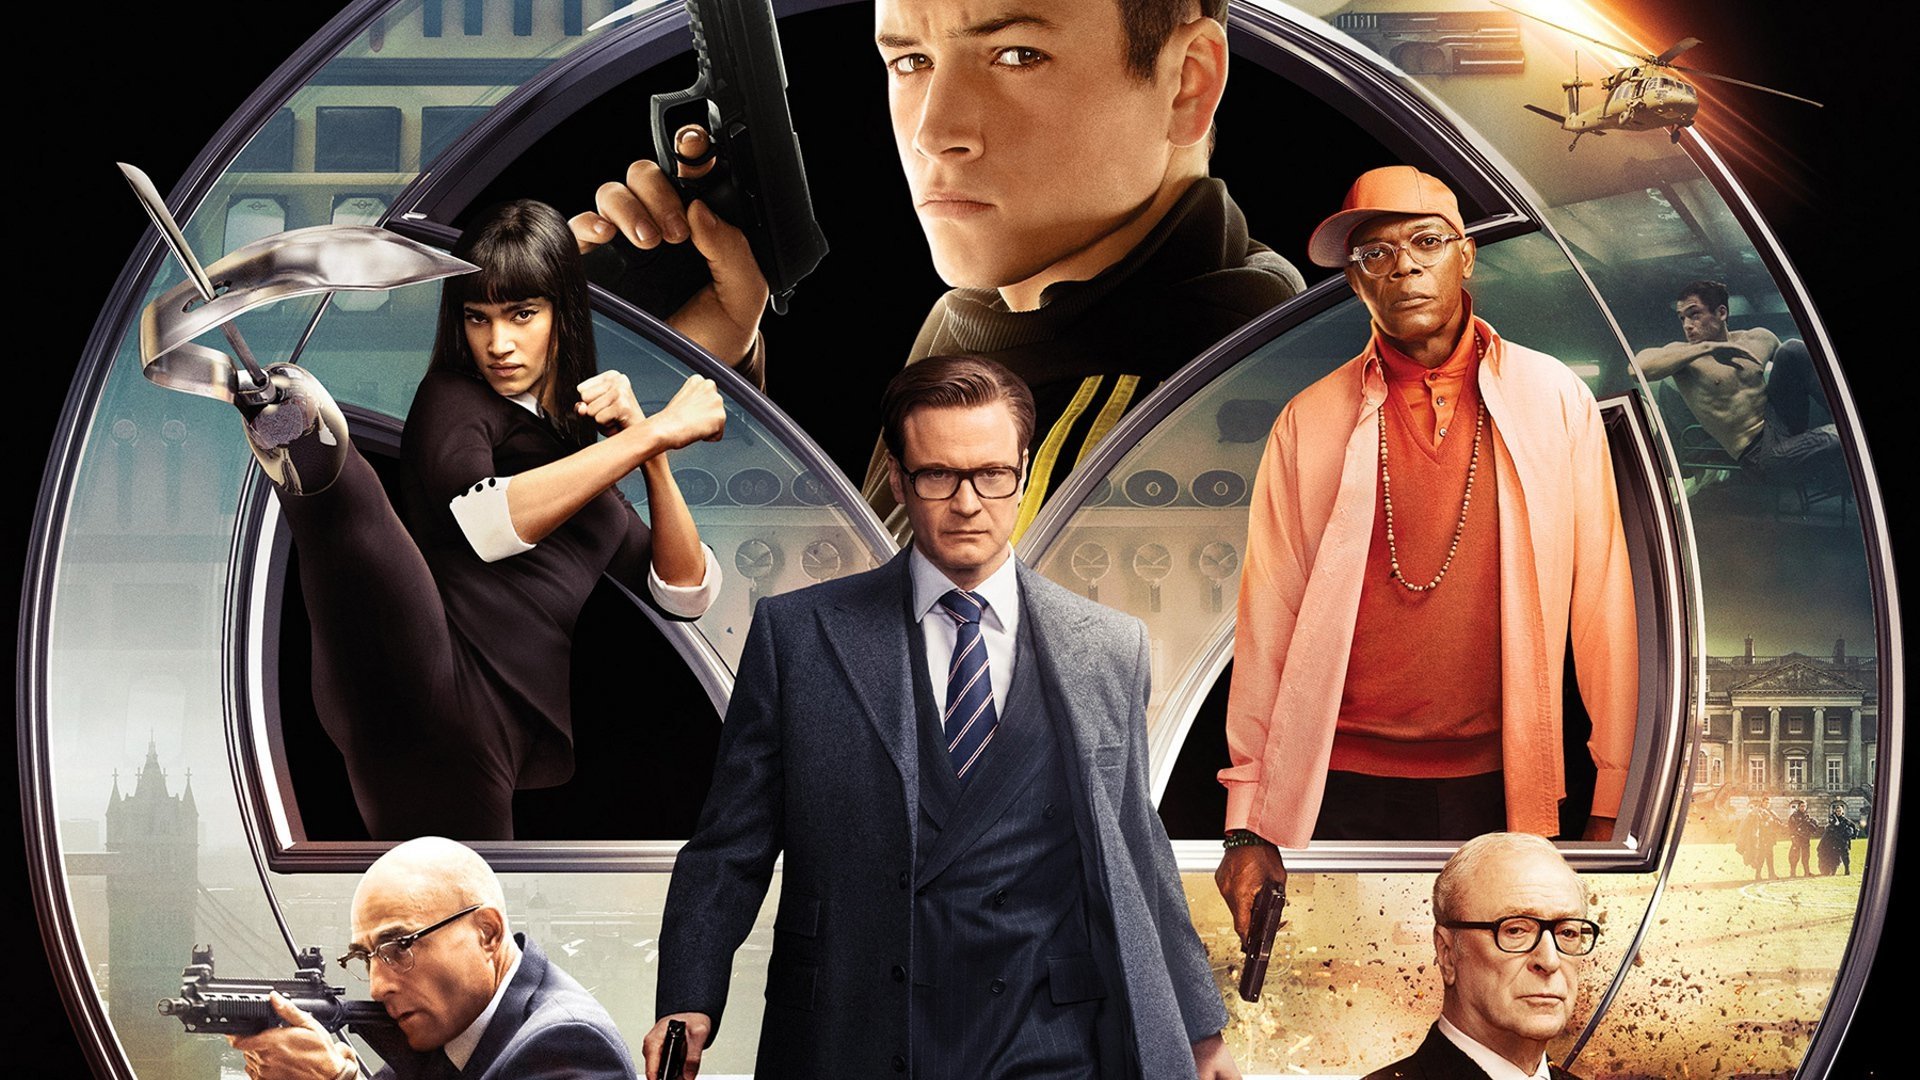 kingsman wallpaper hd,movie,bodyguard,action film,photography,fictional character